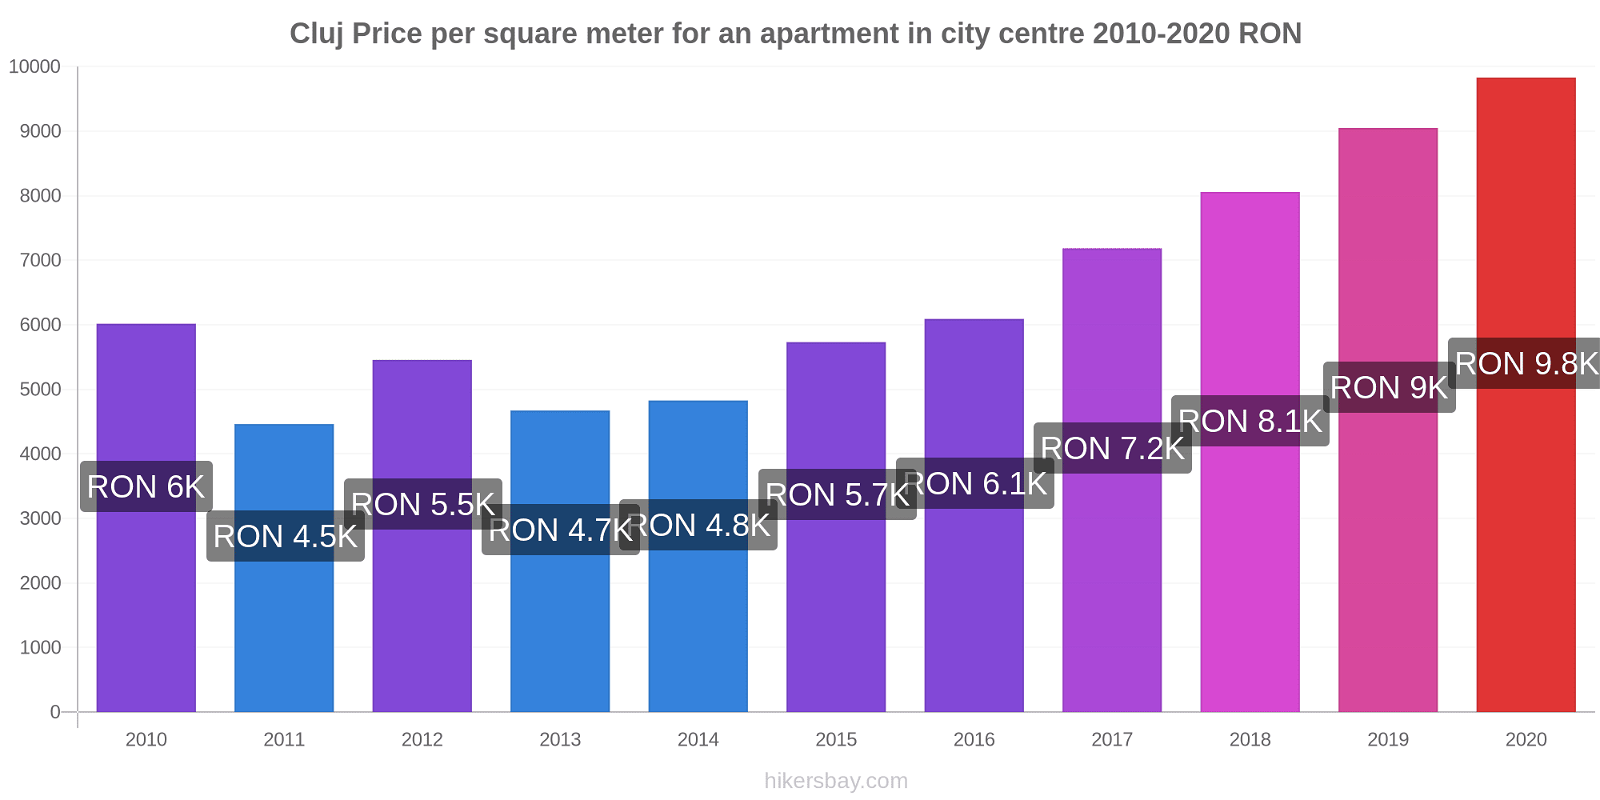 Cluj price changes Price per square meter for an apartment in city centre hikersbay.com